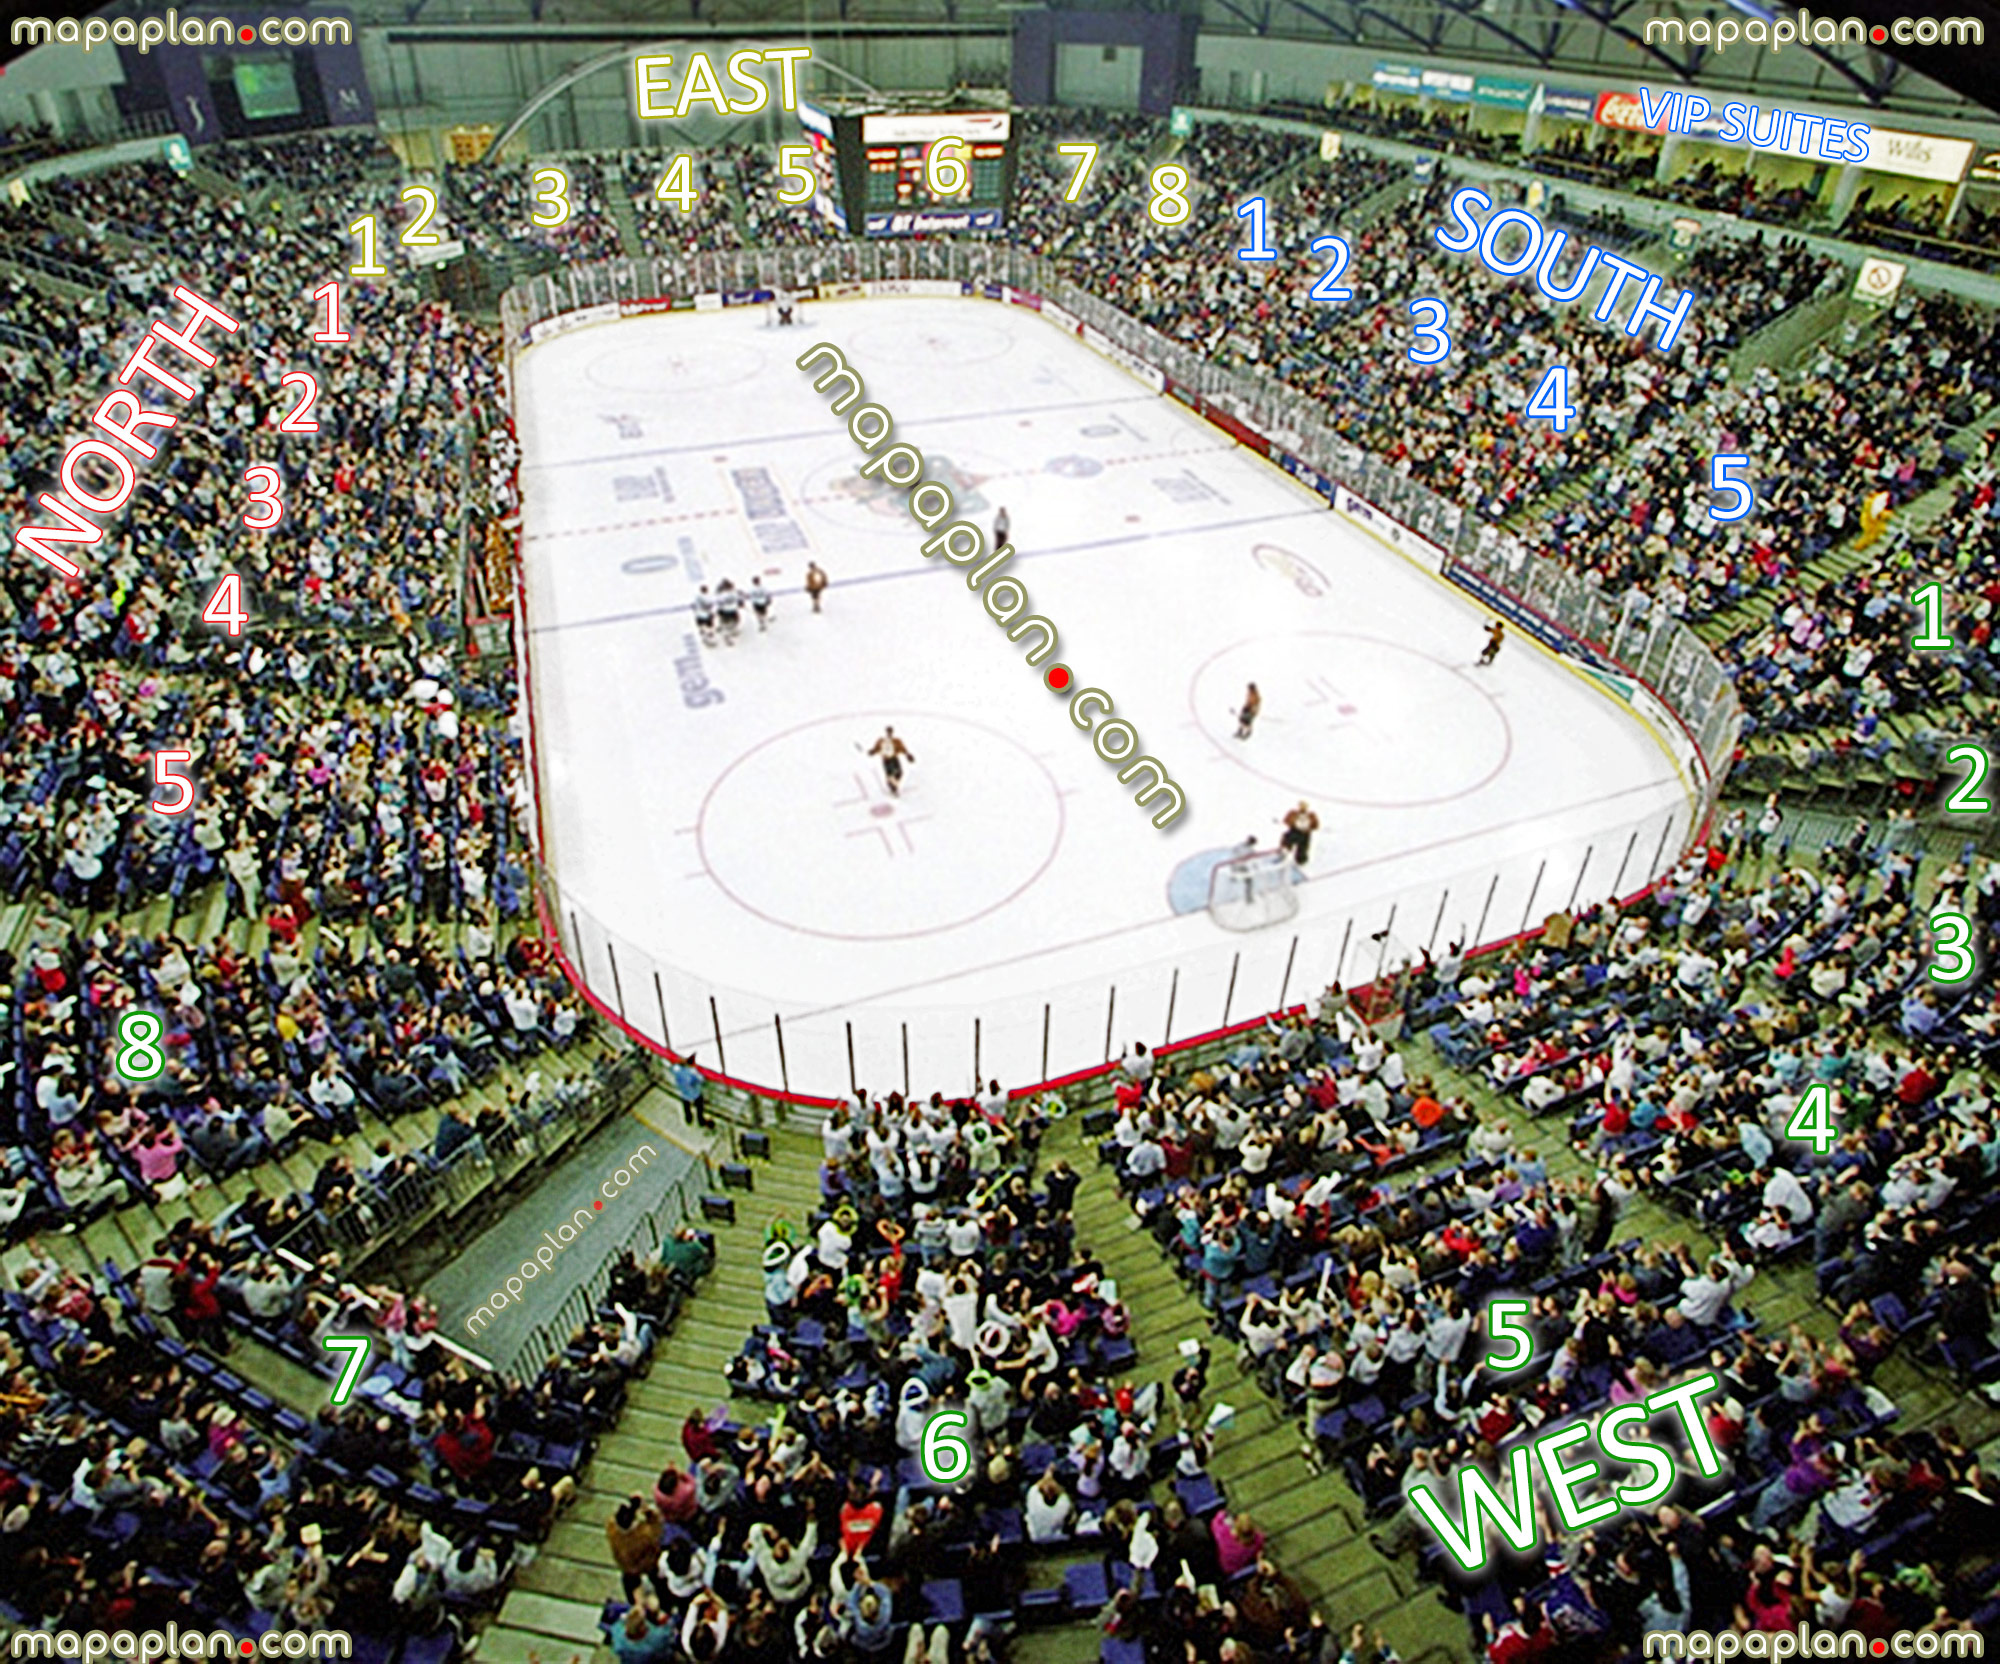 view west 6 section belfast giants club elite ice hockey league eihl game photo panorama layout north south west east blocks vip premium suites boxes Belfast Odyssey SSE Arena seating plan